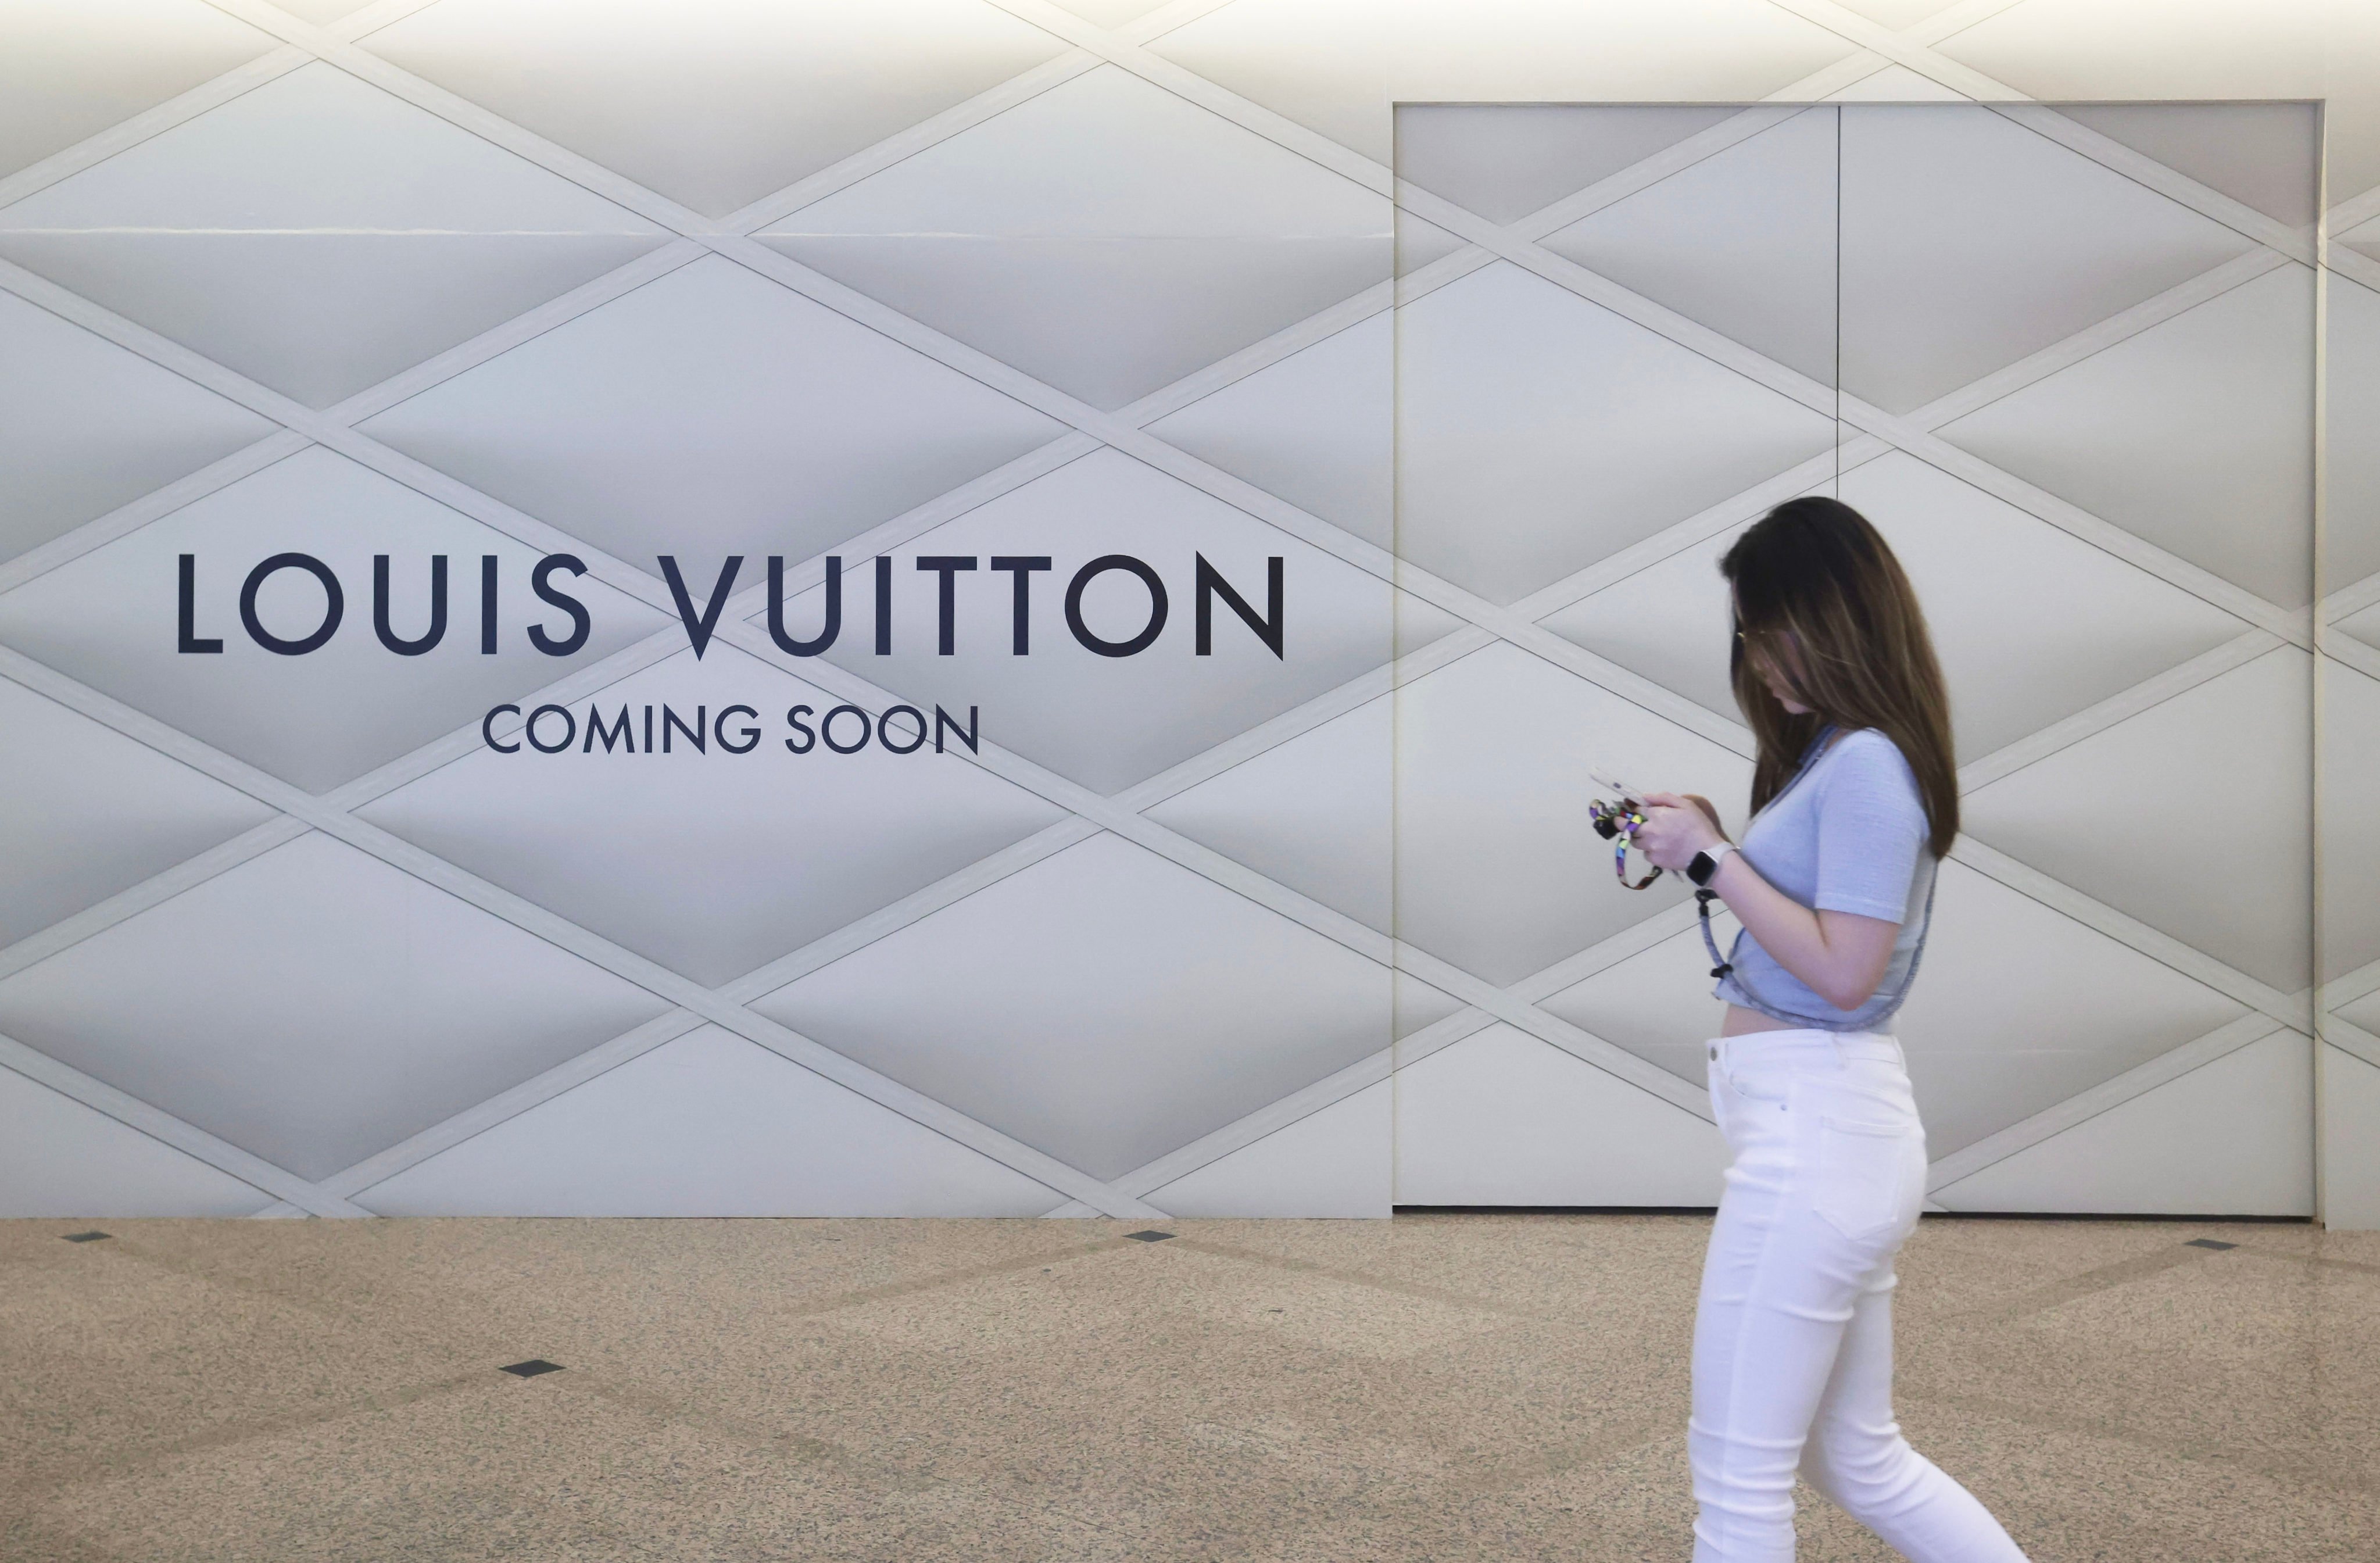 Louis Vuitton is fitting out its new shop in Times Square in Causeway Bay. Photo: Jonathan Wong